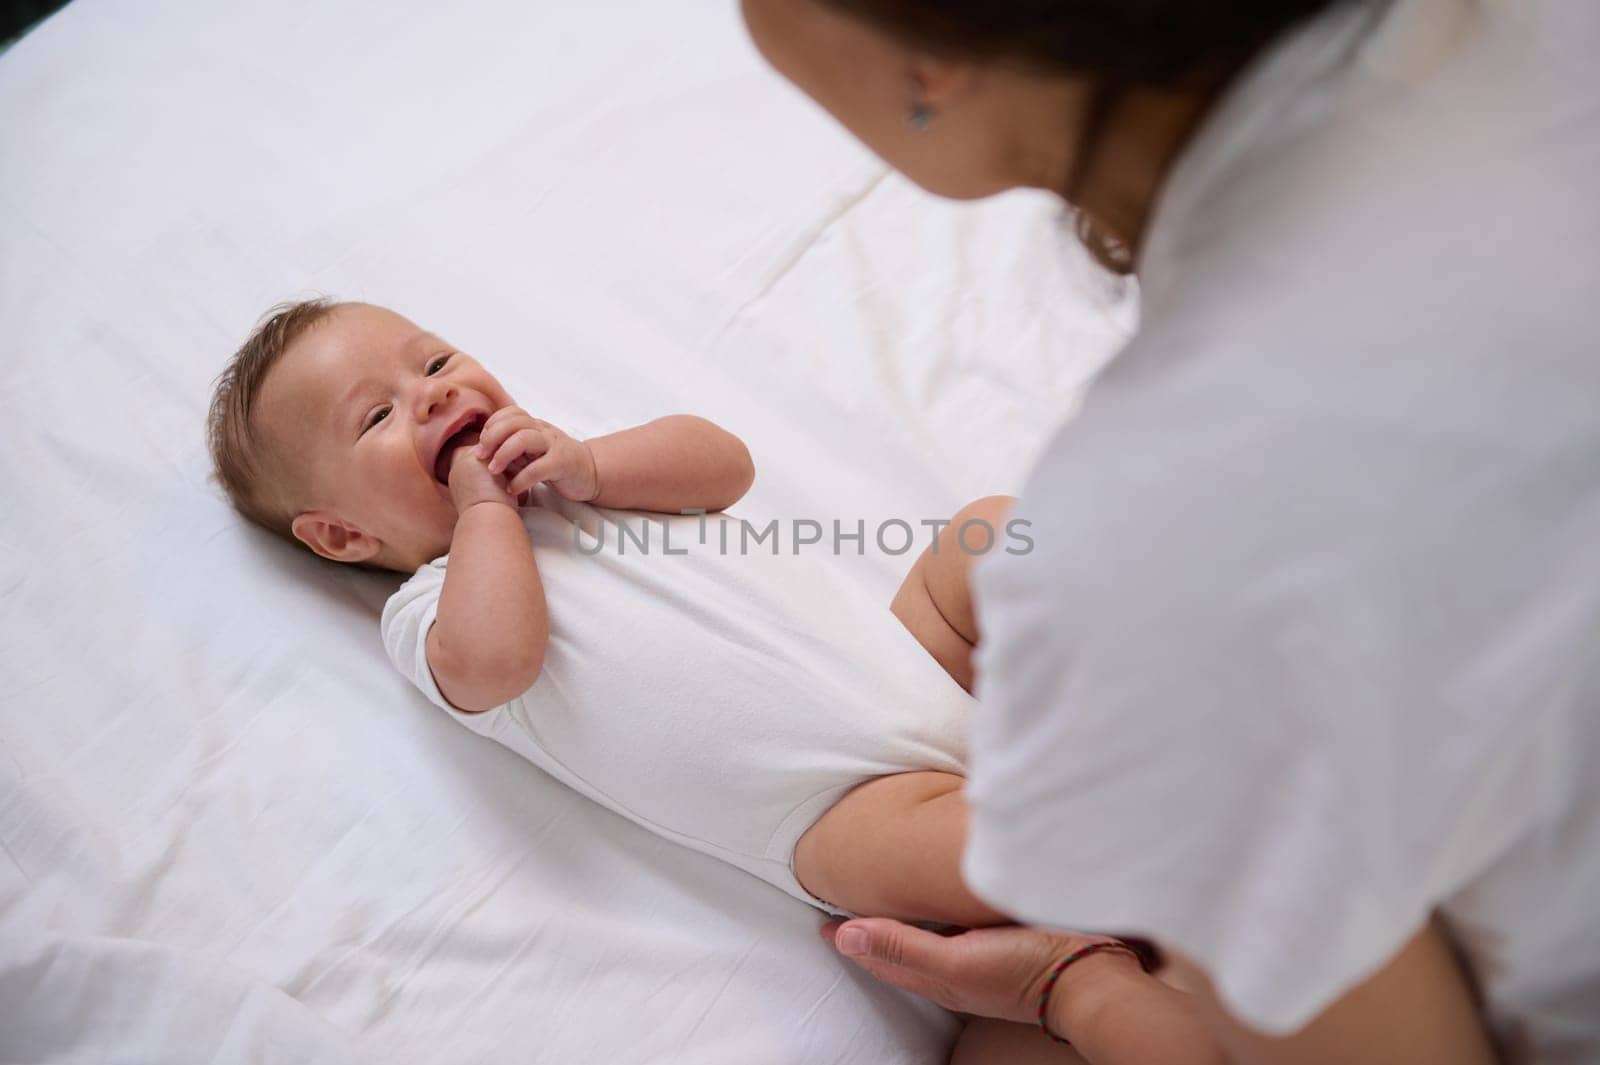 Authentic portrait of a mother taking care of her baby boy. Adorable child 4 months old smiling to his mom, feeling emotional connection. Maternity leave and motherhood lifestyle. Babyhood. Infancy